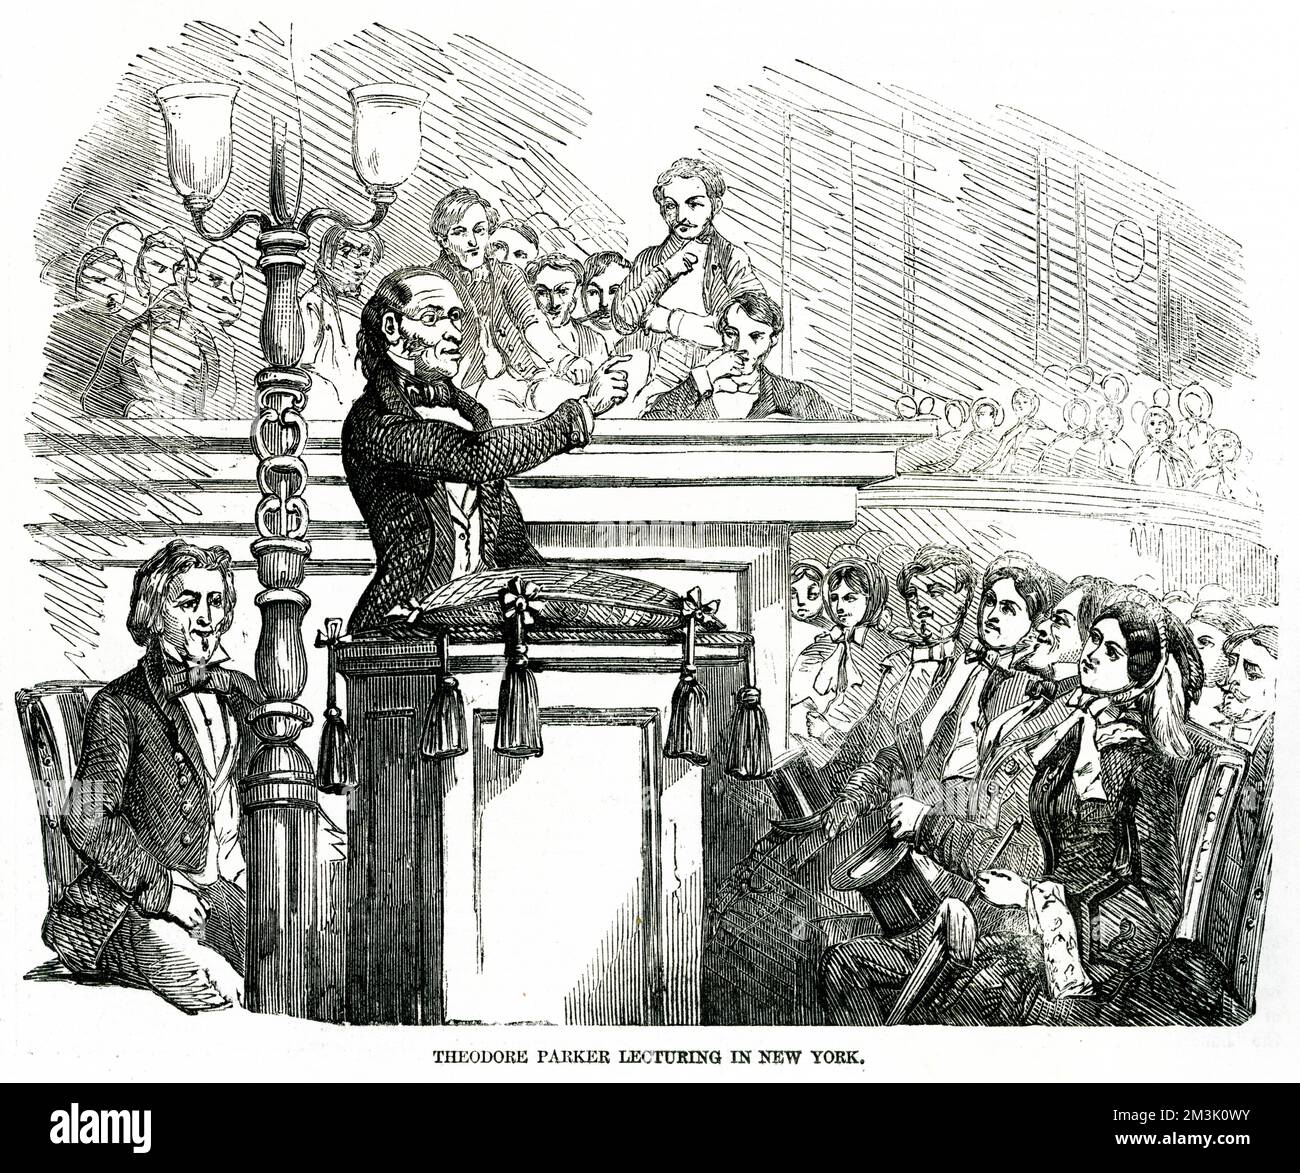 Theodore Parker (1810 - 1860), the famous Unitarian Minister, lecturer, scholar, writer and committed abolitionist. He is depicted lecturing an audience in New York on slavery and abolition.     Date: 1856 Stock Photo